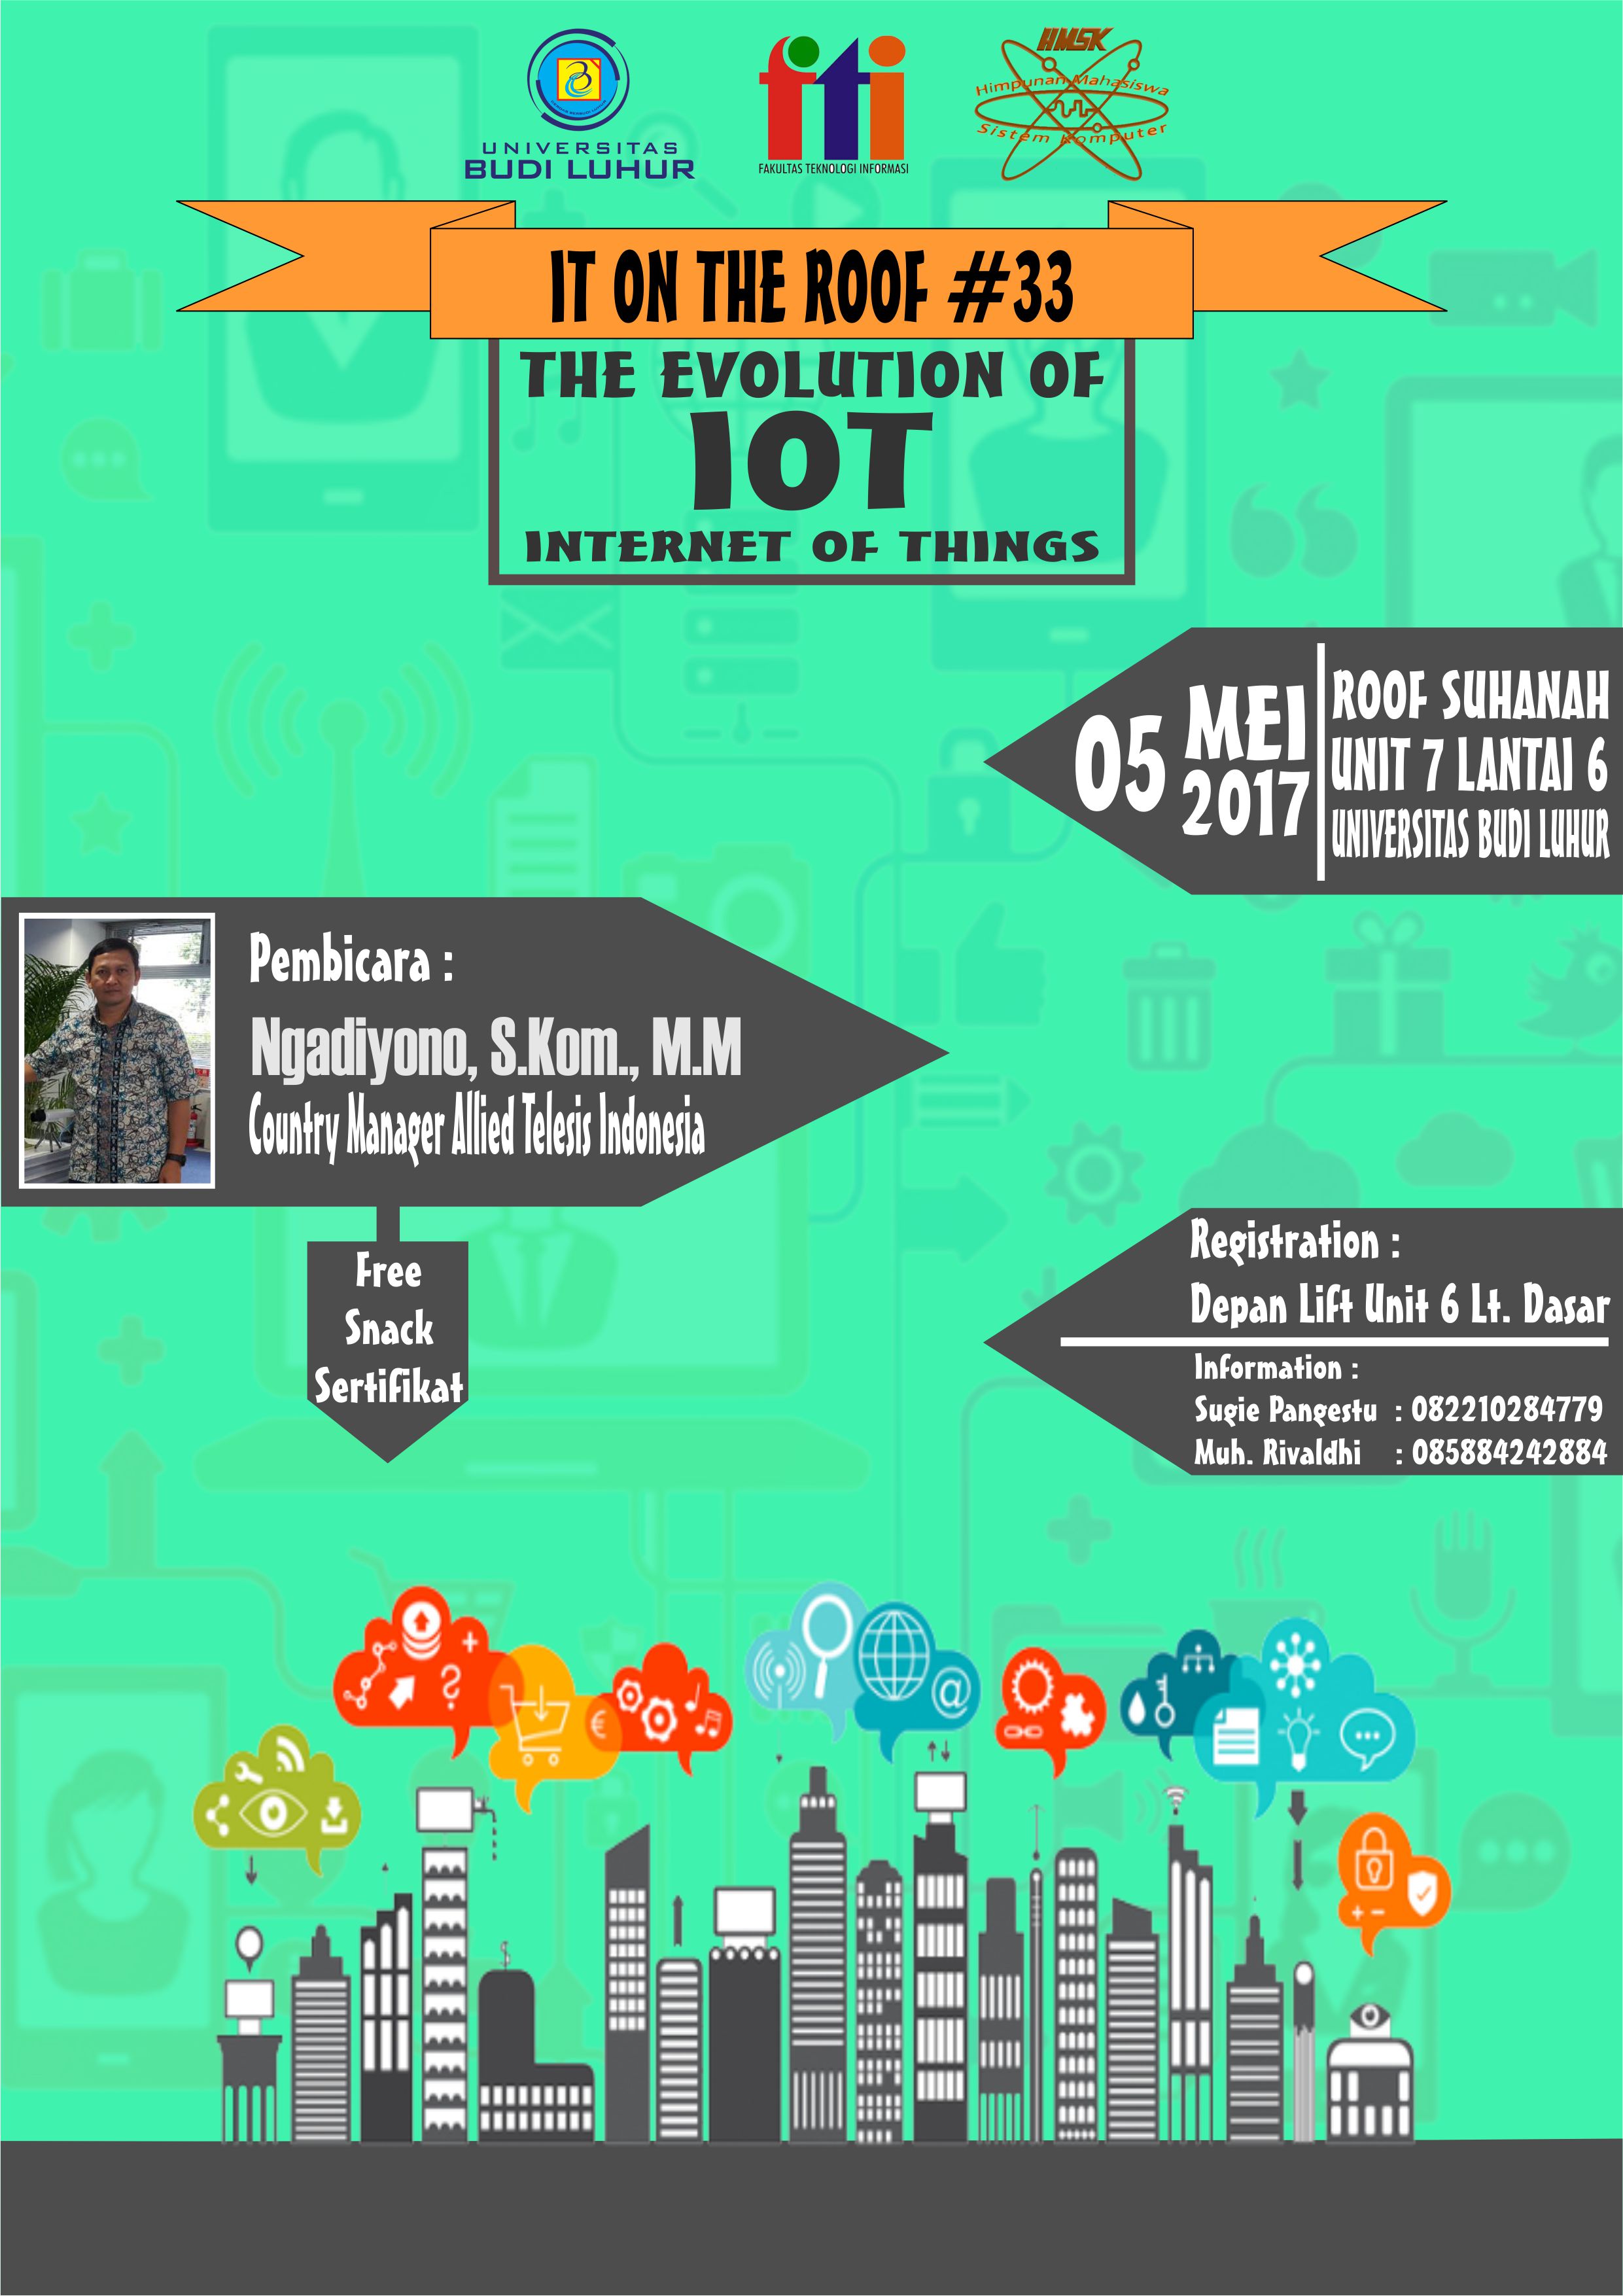 Seminar ITOR #33 "The Evolution Of Internet Of Things"